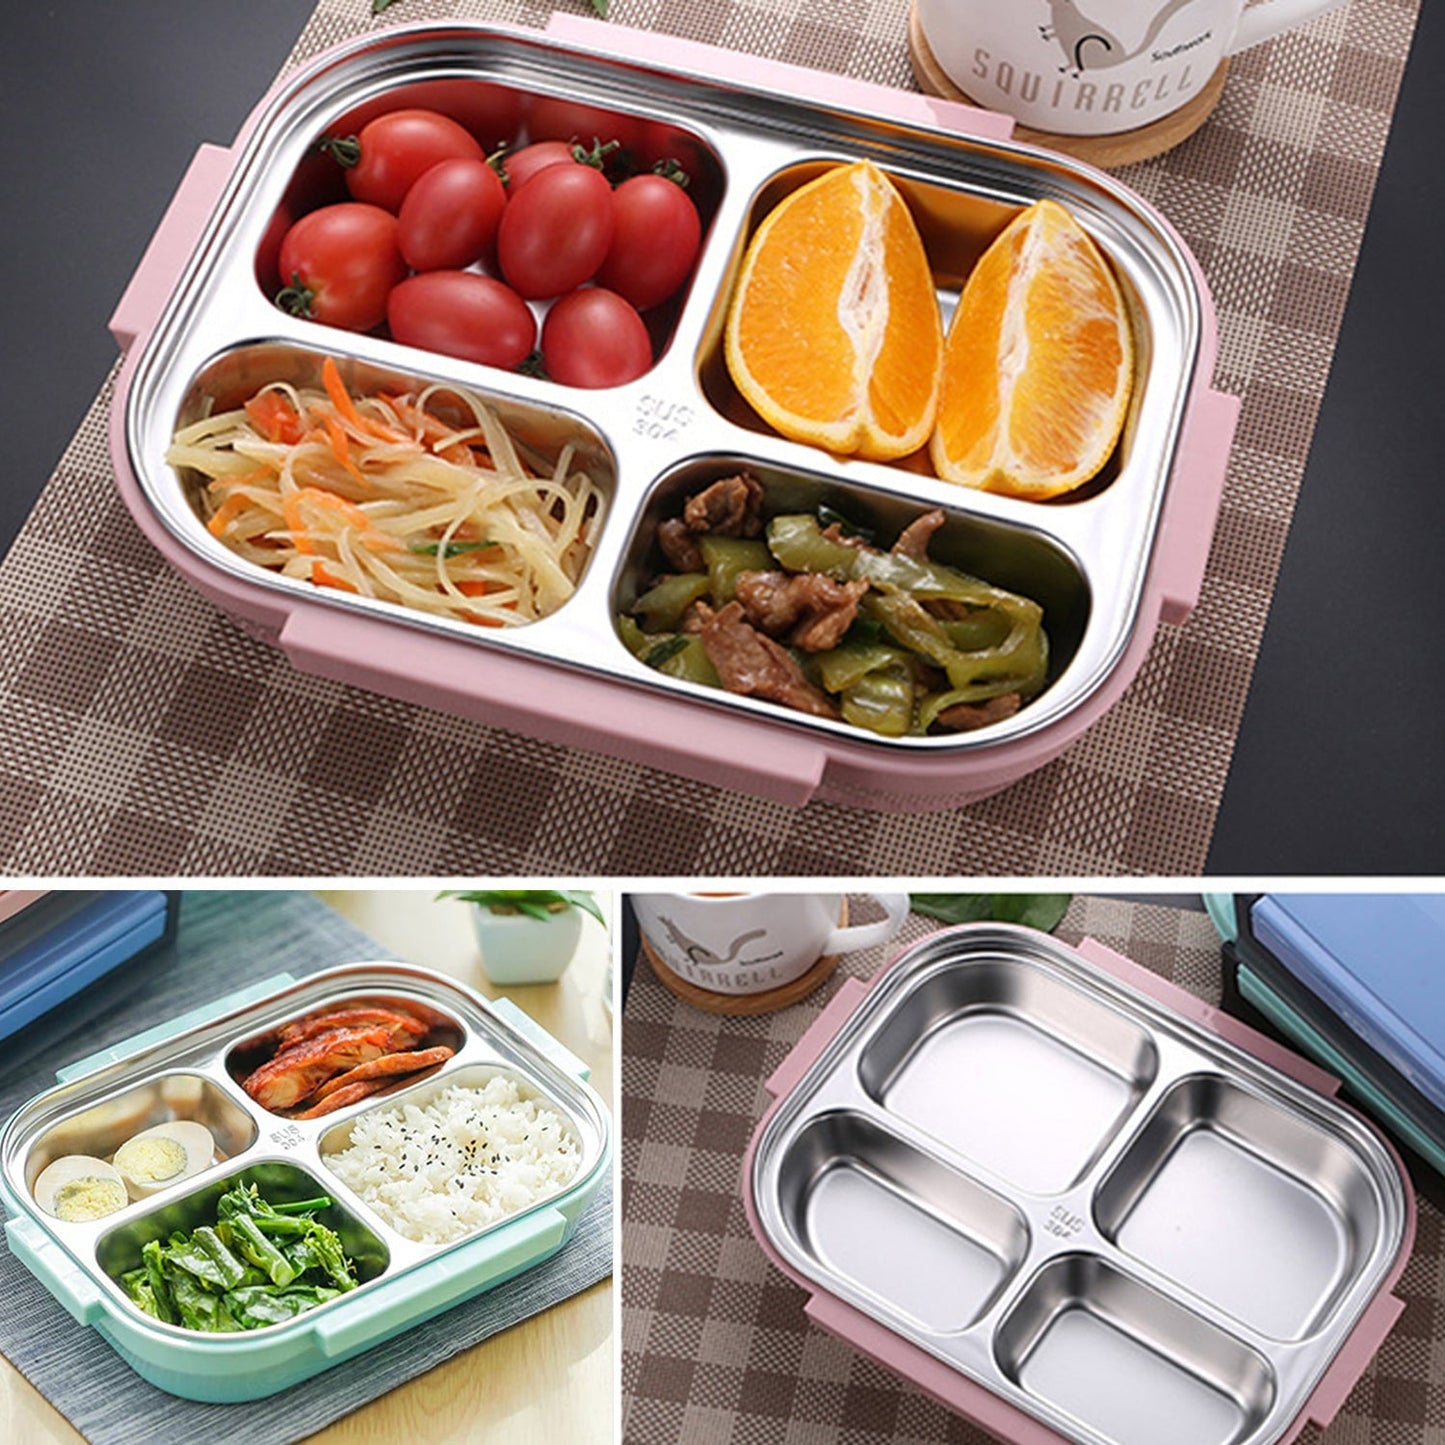 2979 Black Transparent 4 Compartment Lunch Box for Kids and adults, Stainless Steel Lunch Box with 4 Compartments. 